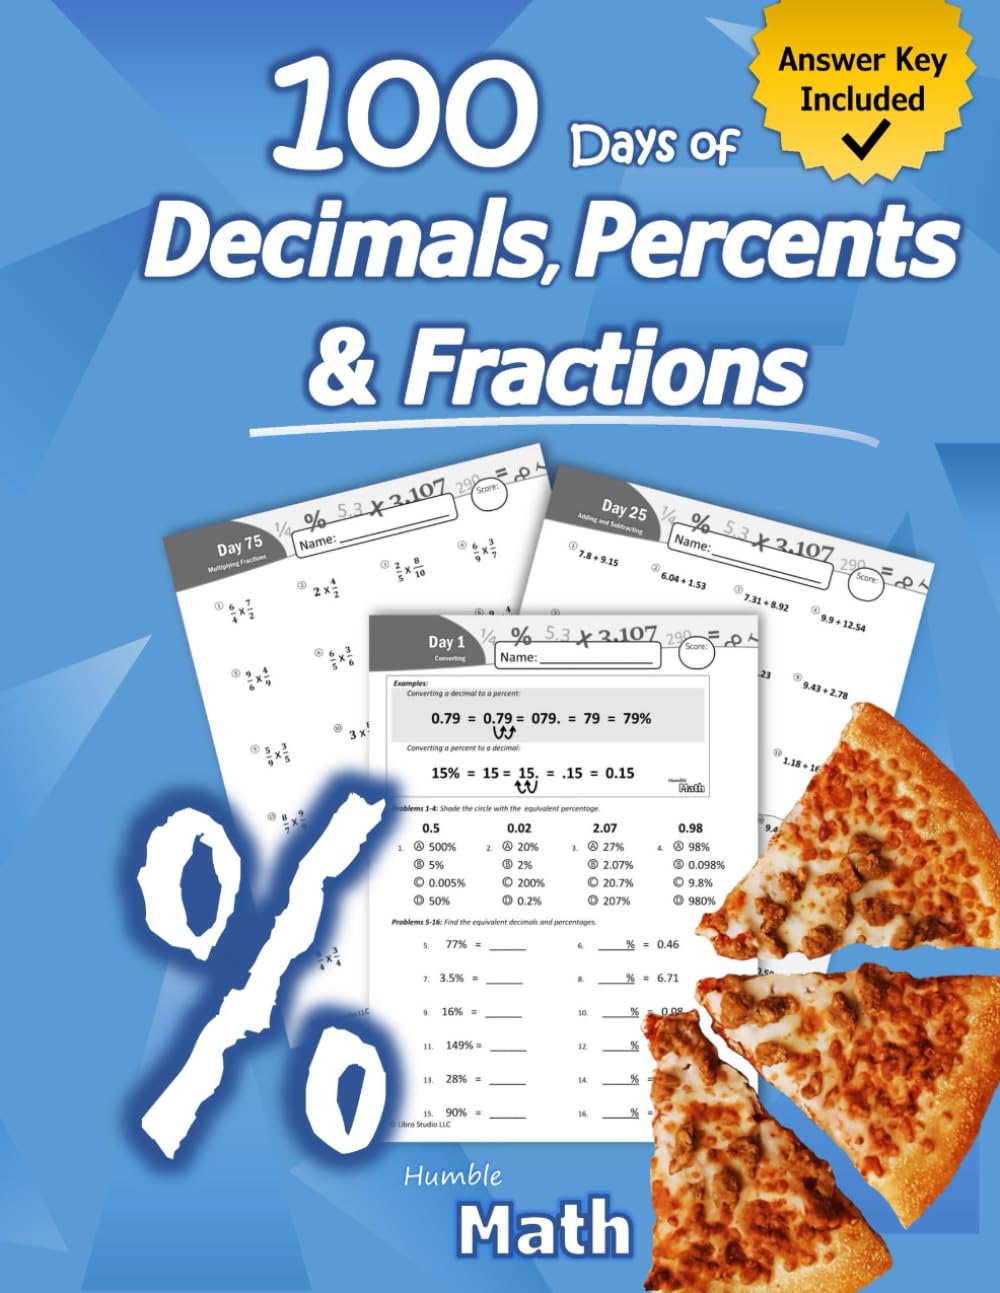 Humble Math - 100 Days of Decimals, Percents & Fractions: Advanced Practice Problems (Answer Key Included) - Converting Numbers - Adding, Subtracting, by Math, Humble